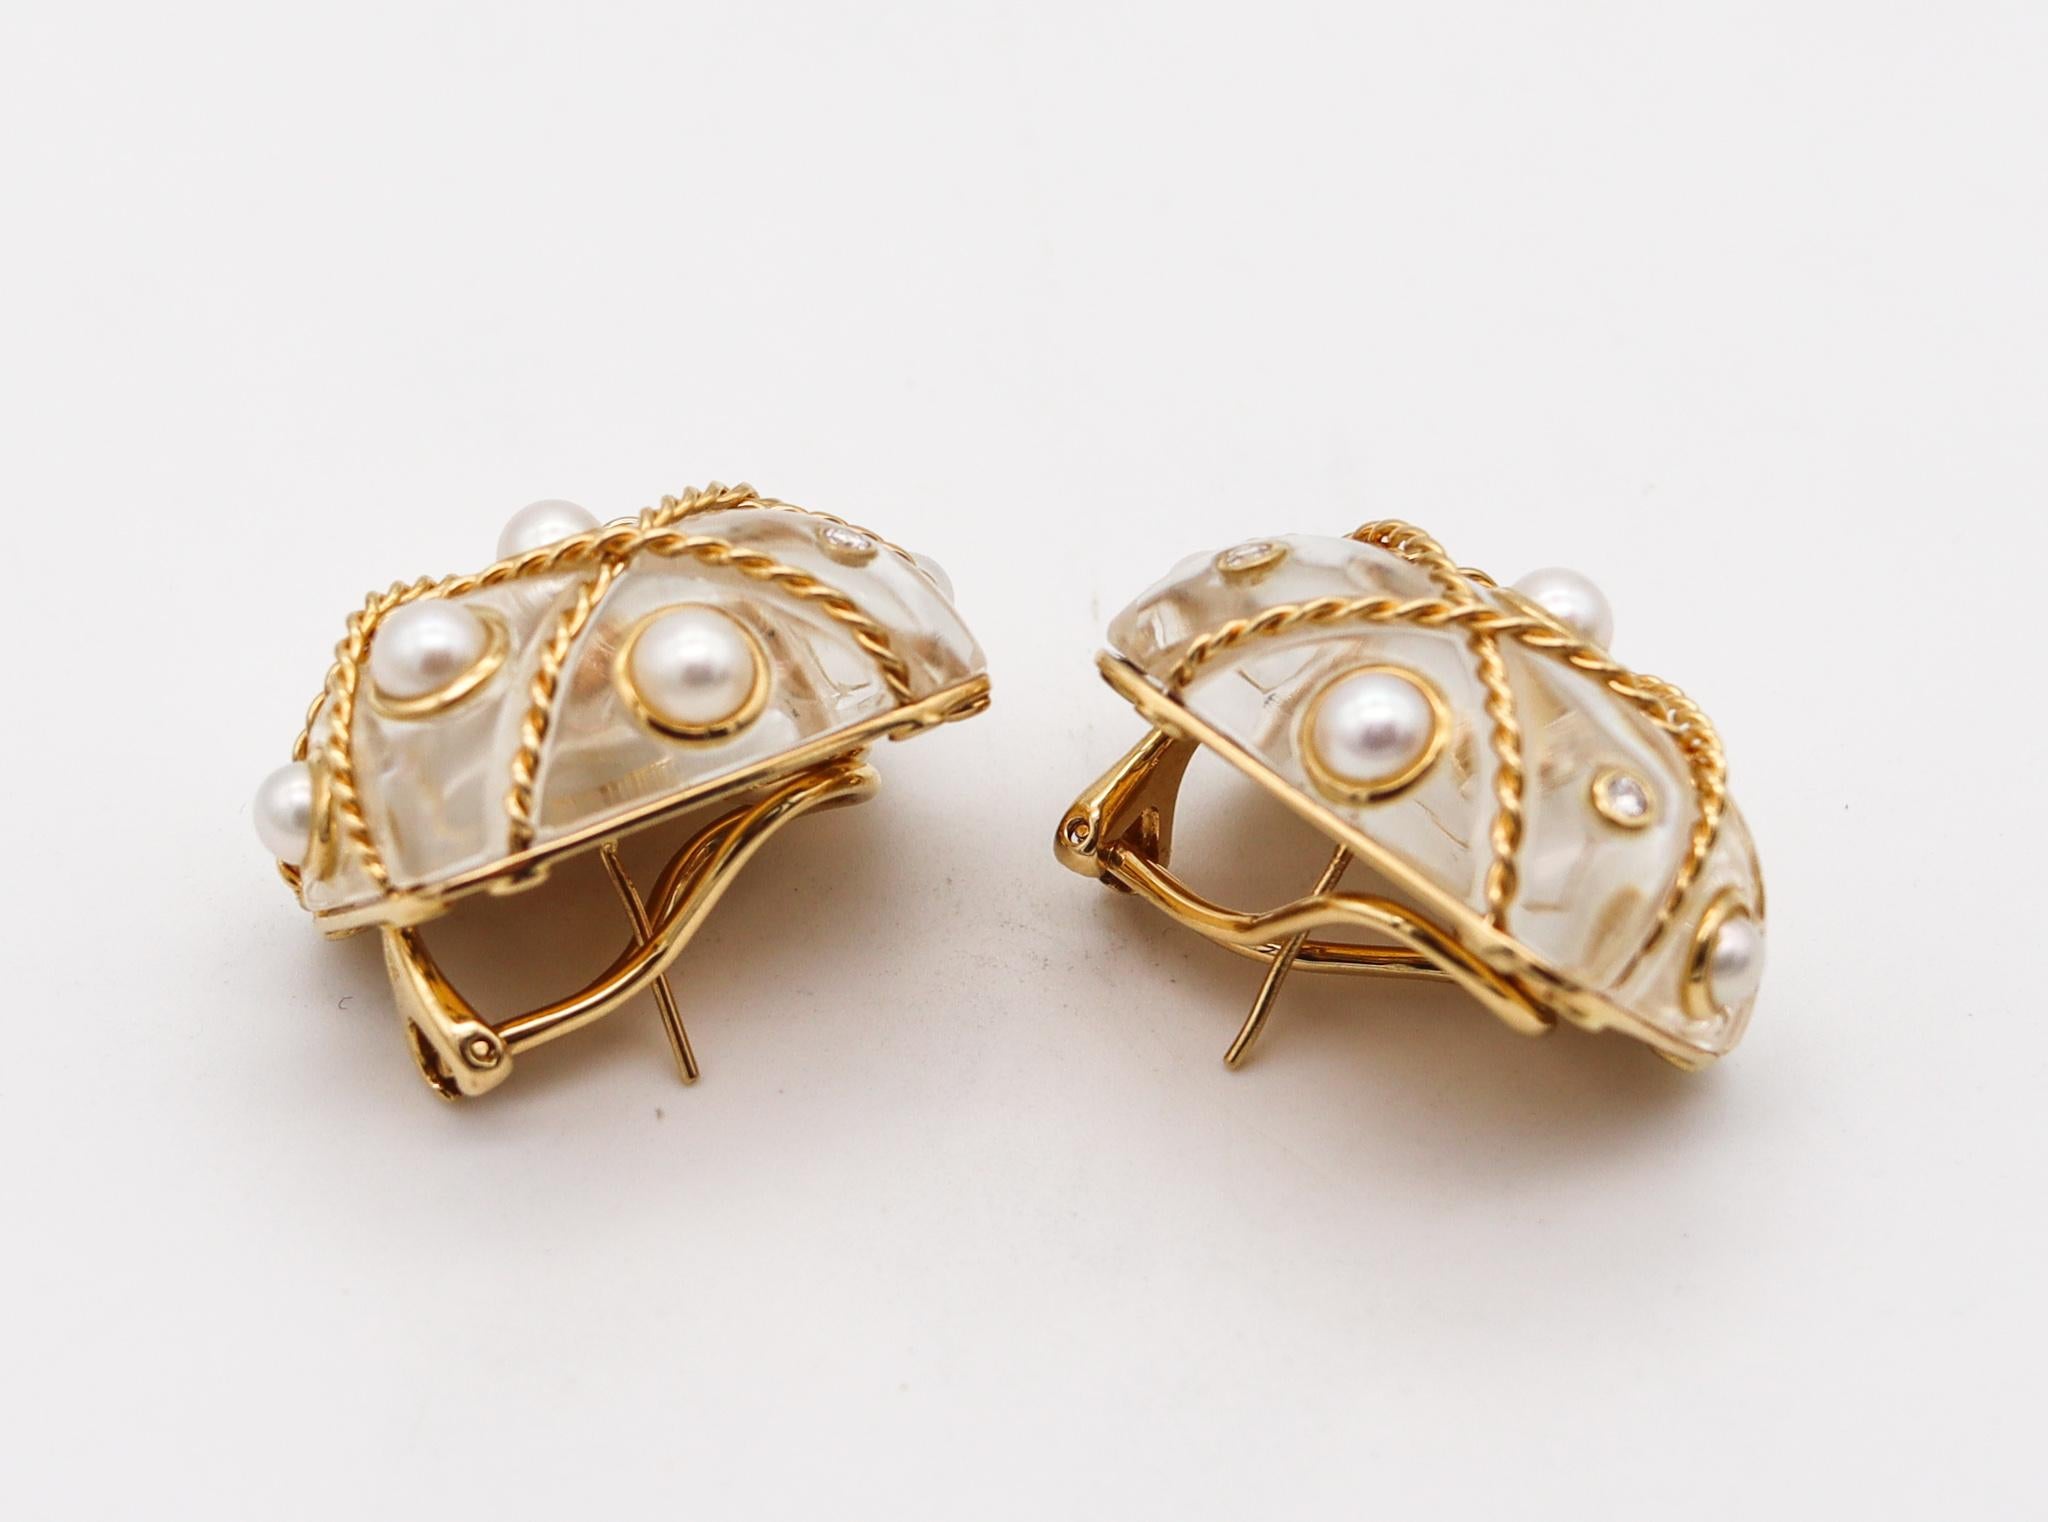 Cabochon Trianon by Seaman Schepps Rock Quartz Caged Clip Earrings 18Kt Gold with Diamond For Sale